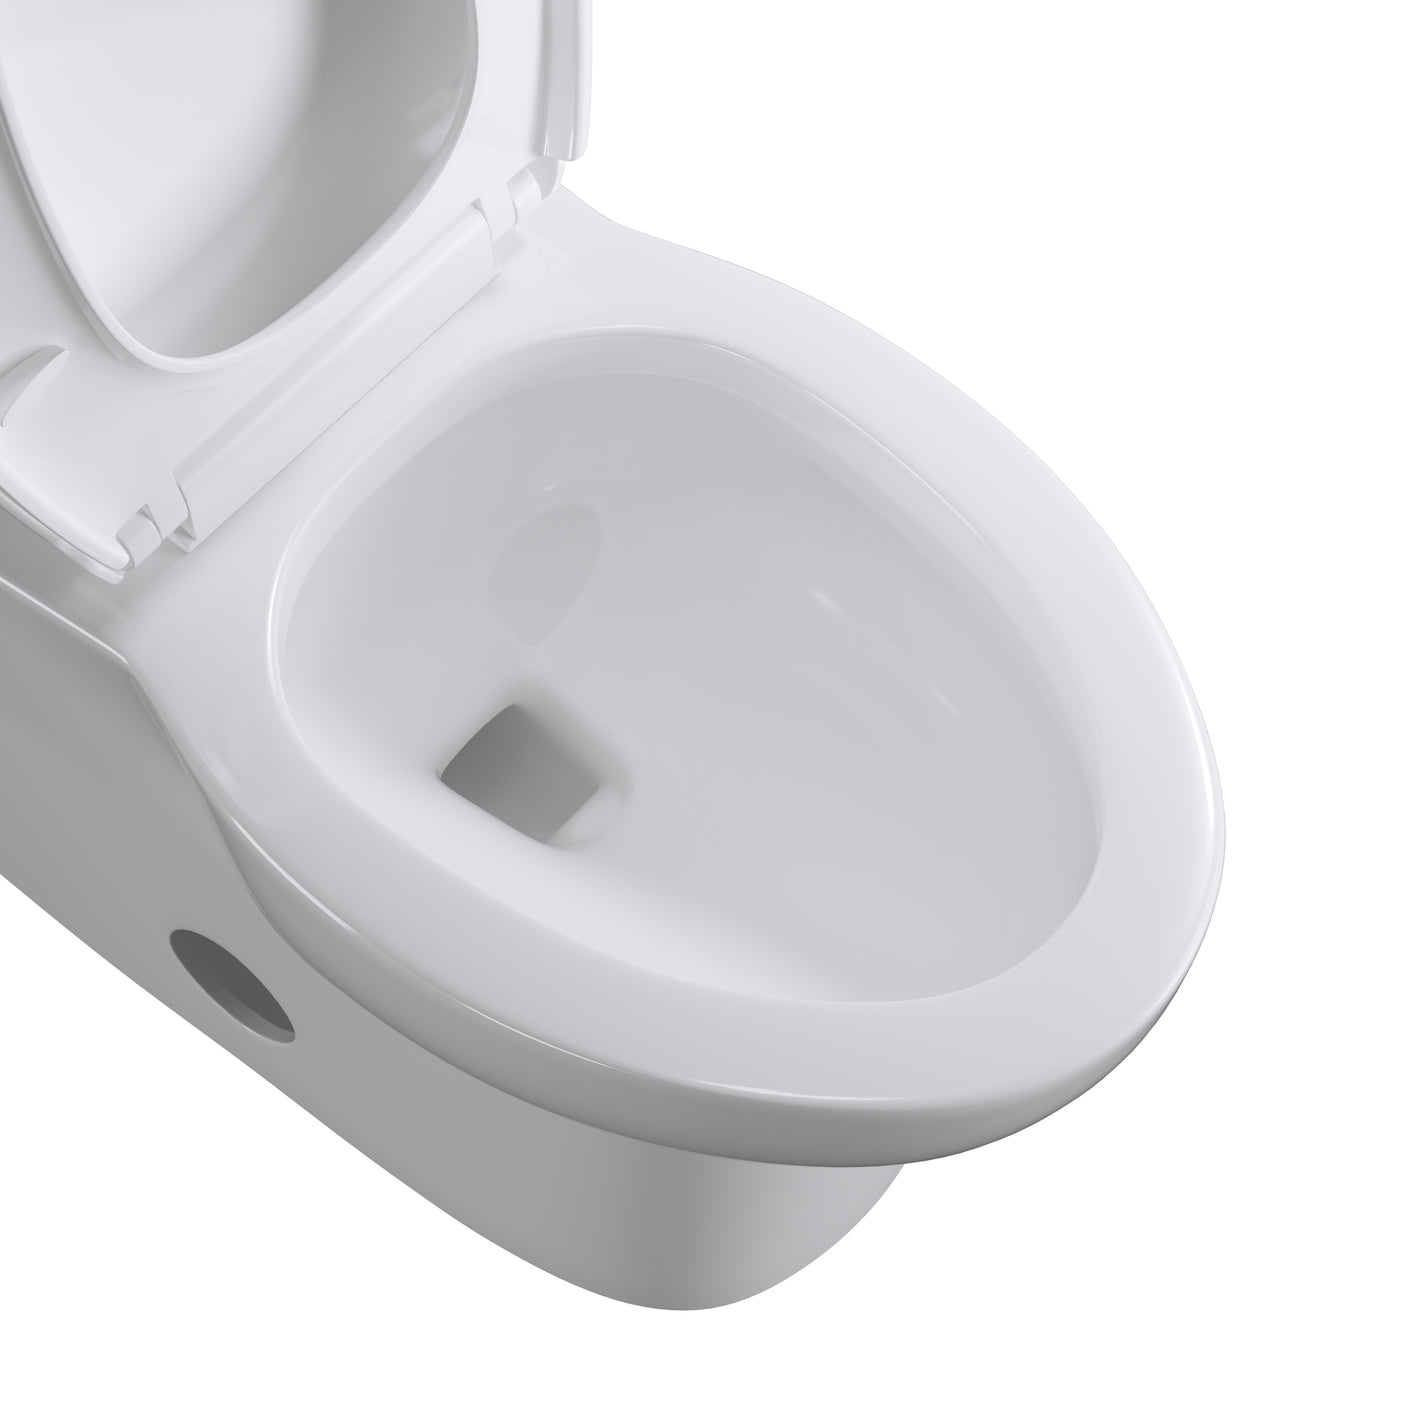 One-Piece Toilet 1.28GPF Siphon Jet Flushing with Toilet Seat